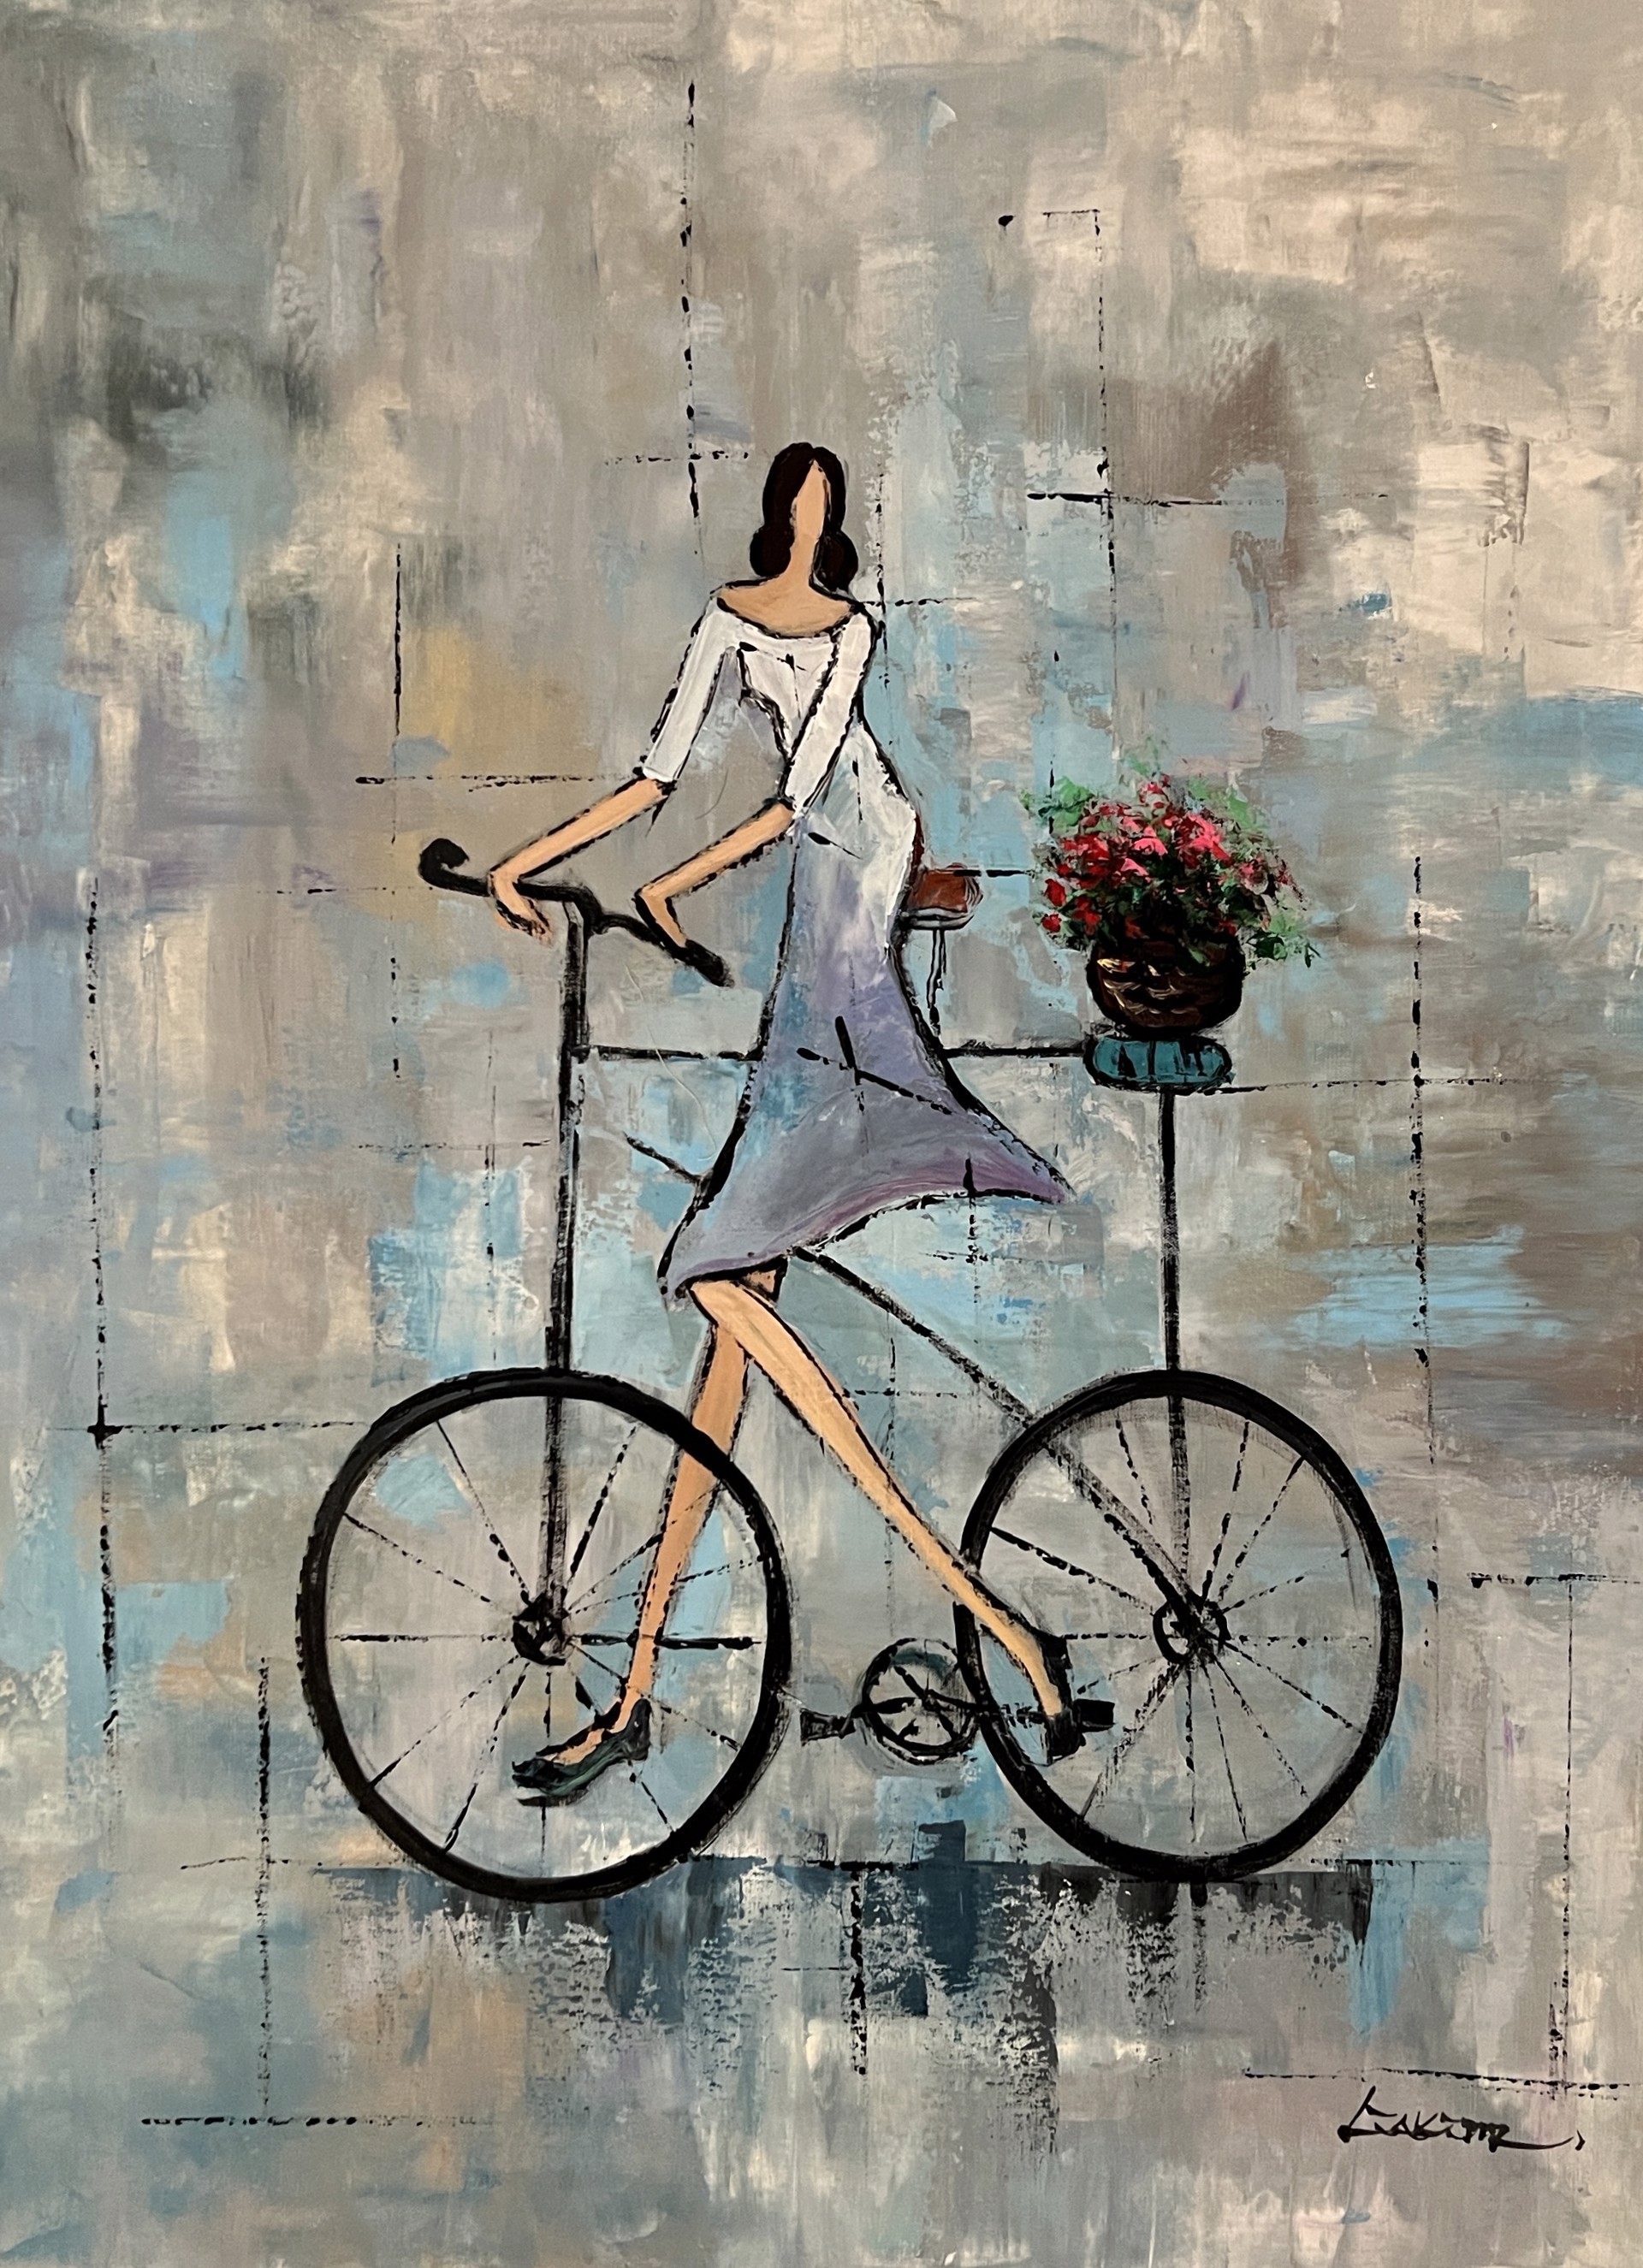 BICYCLE WITH BASKET OF FLOWERS by LIA KIM